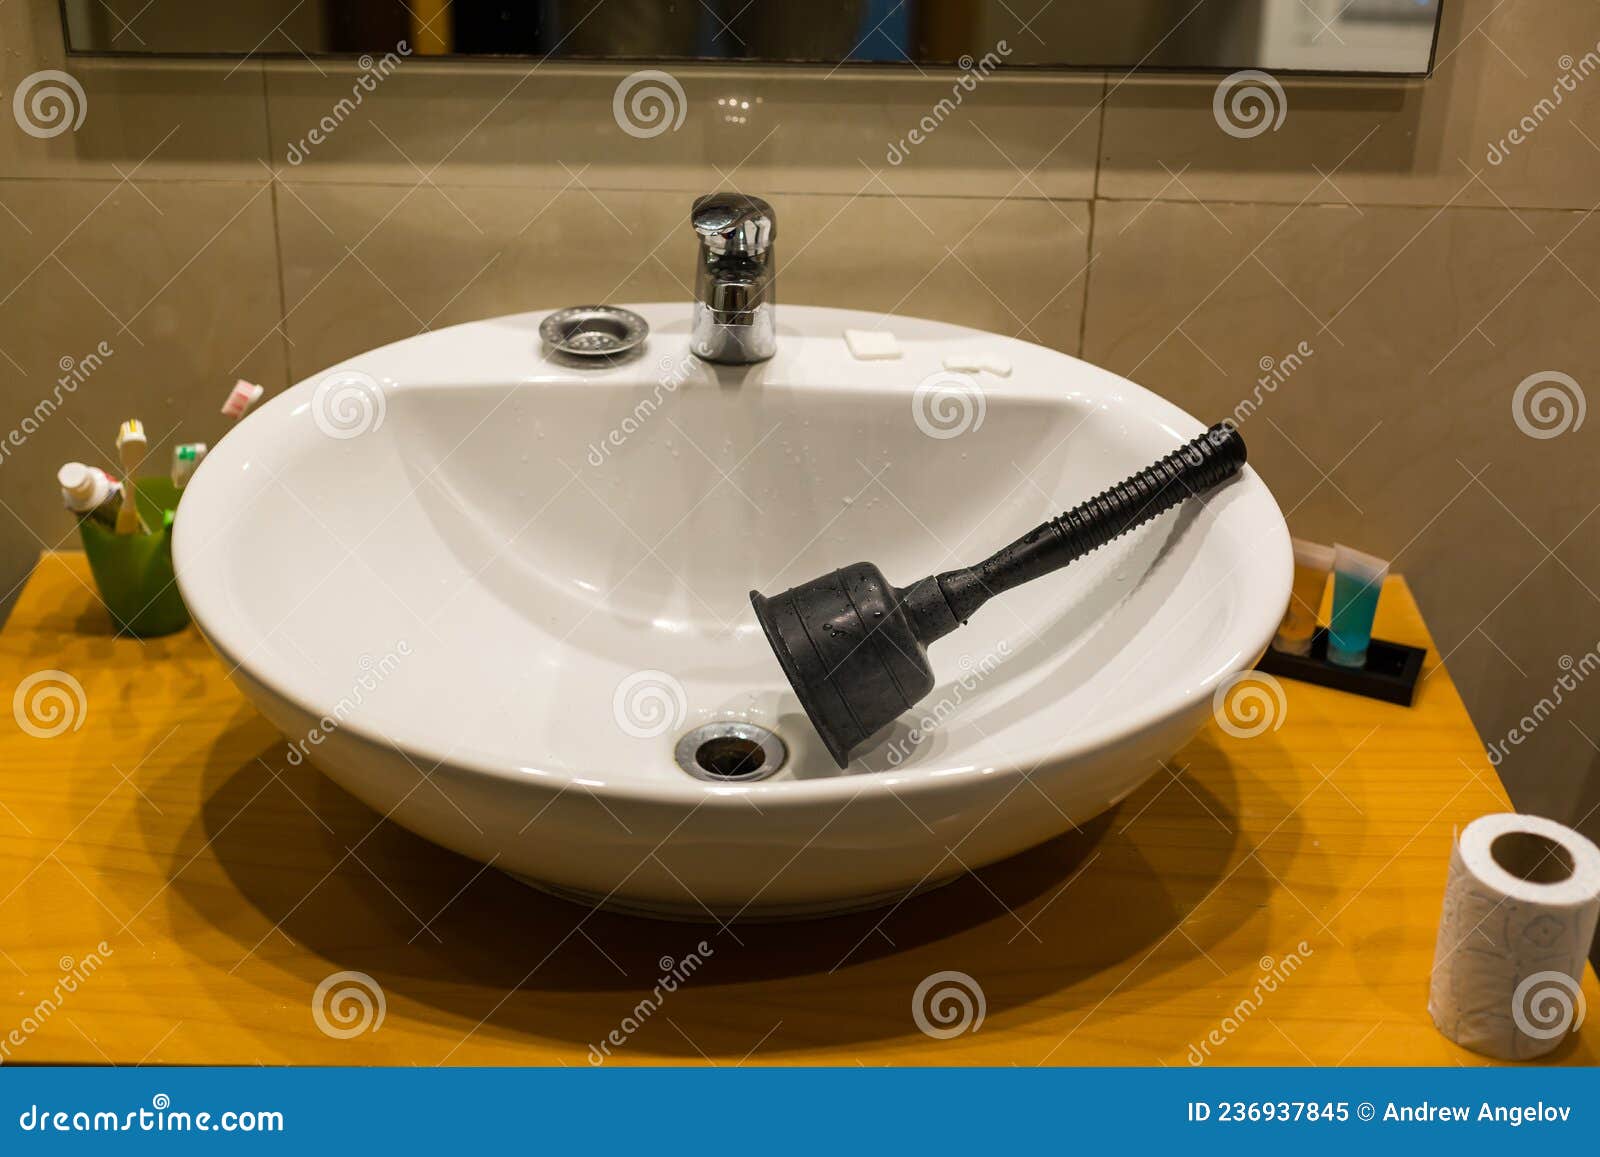 https://thumbs.dreamstime.com/z/close-up-plumbers-using-plunger-bathroom-sink-close-up-plumbers-using-plunger-236937845.jpg